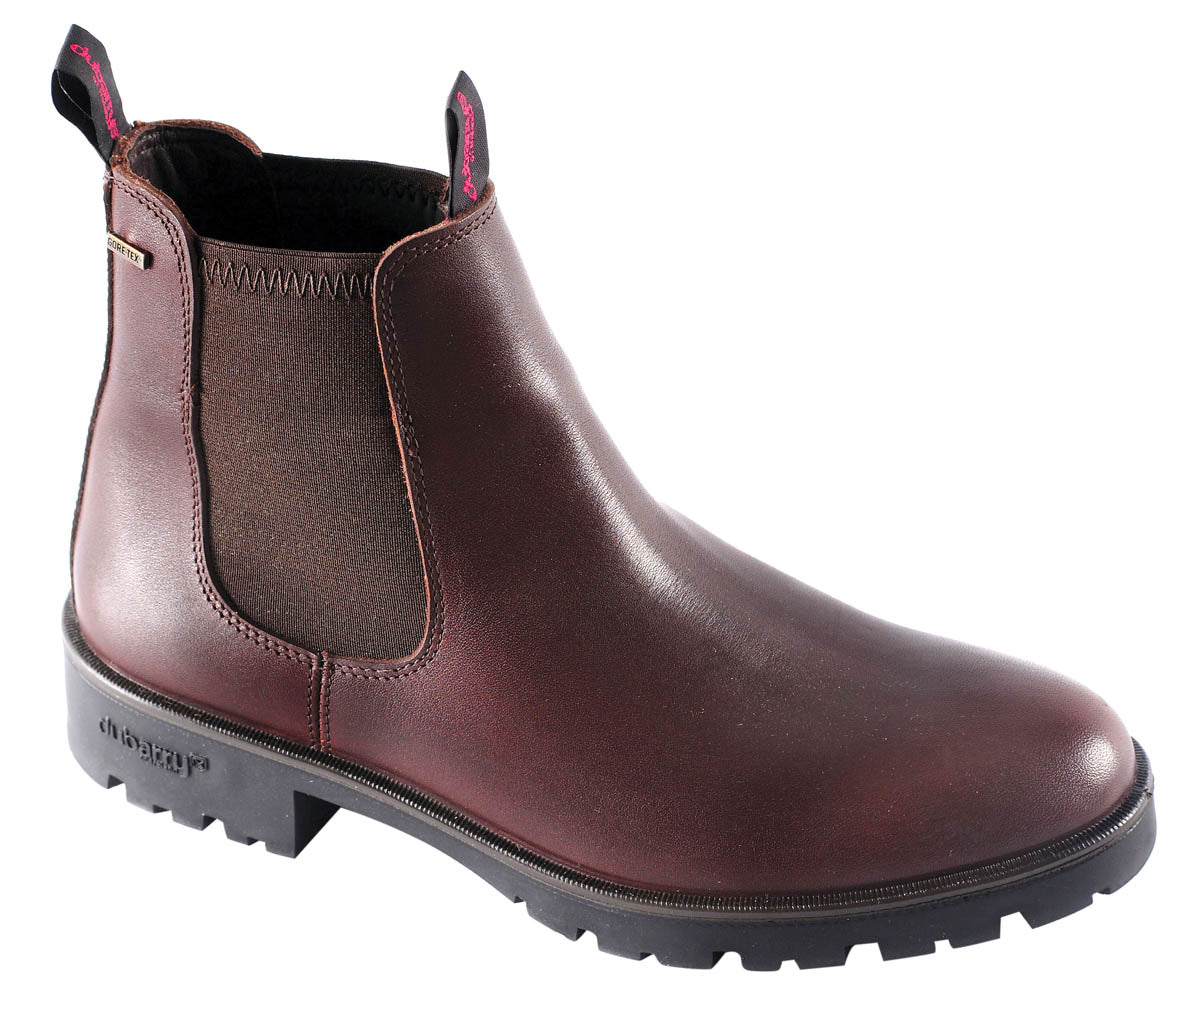 Dubarry Kilkenny Country Boot